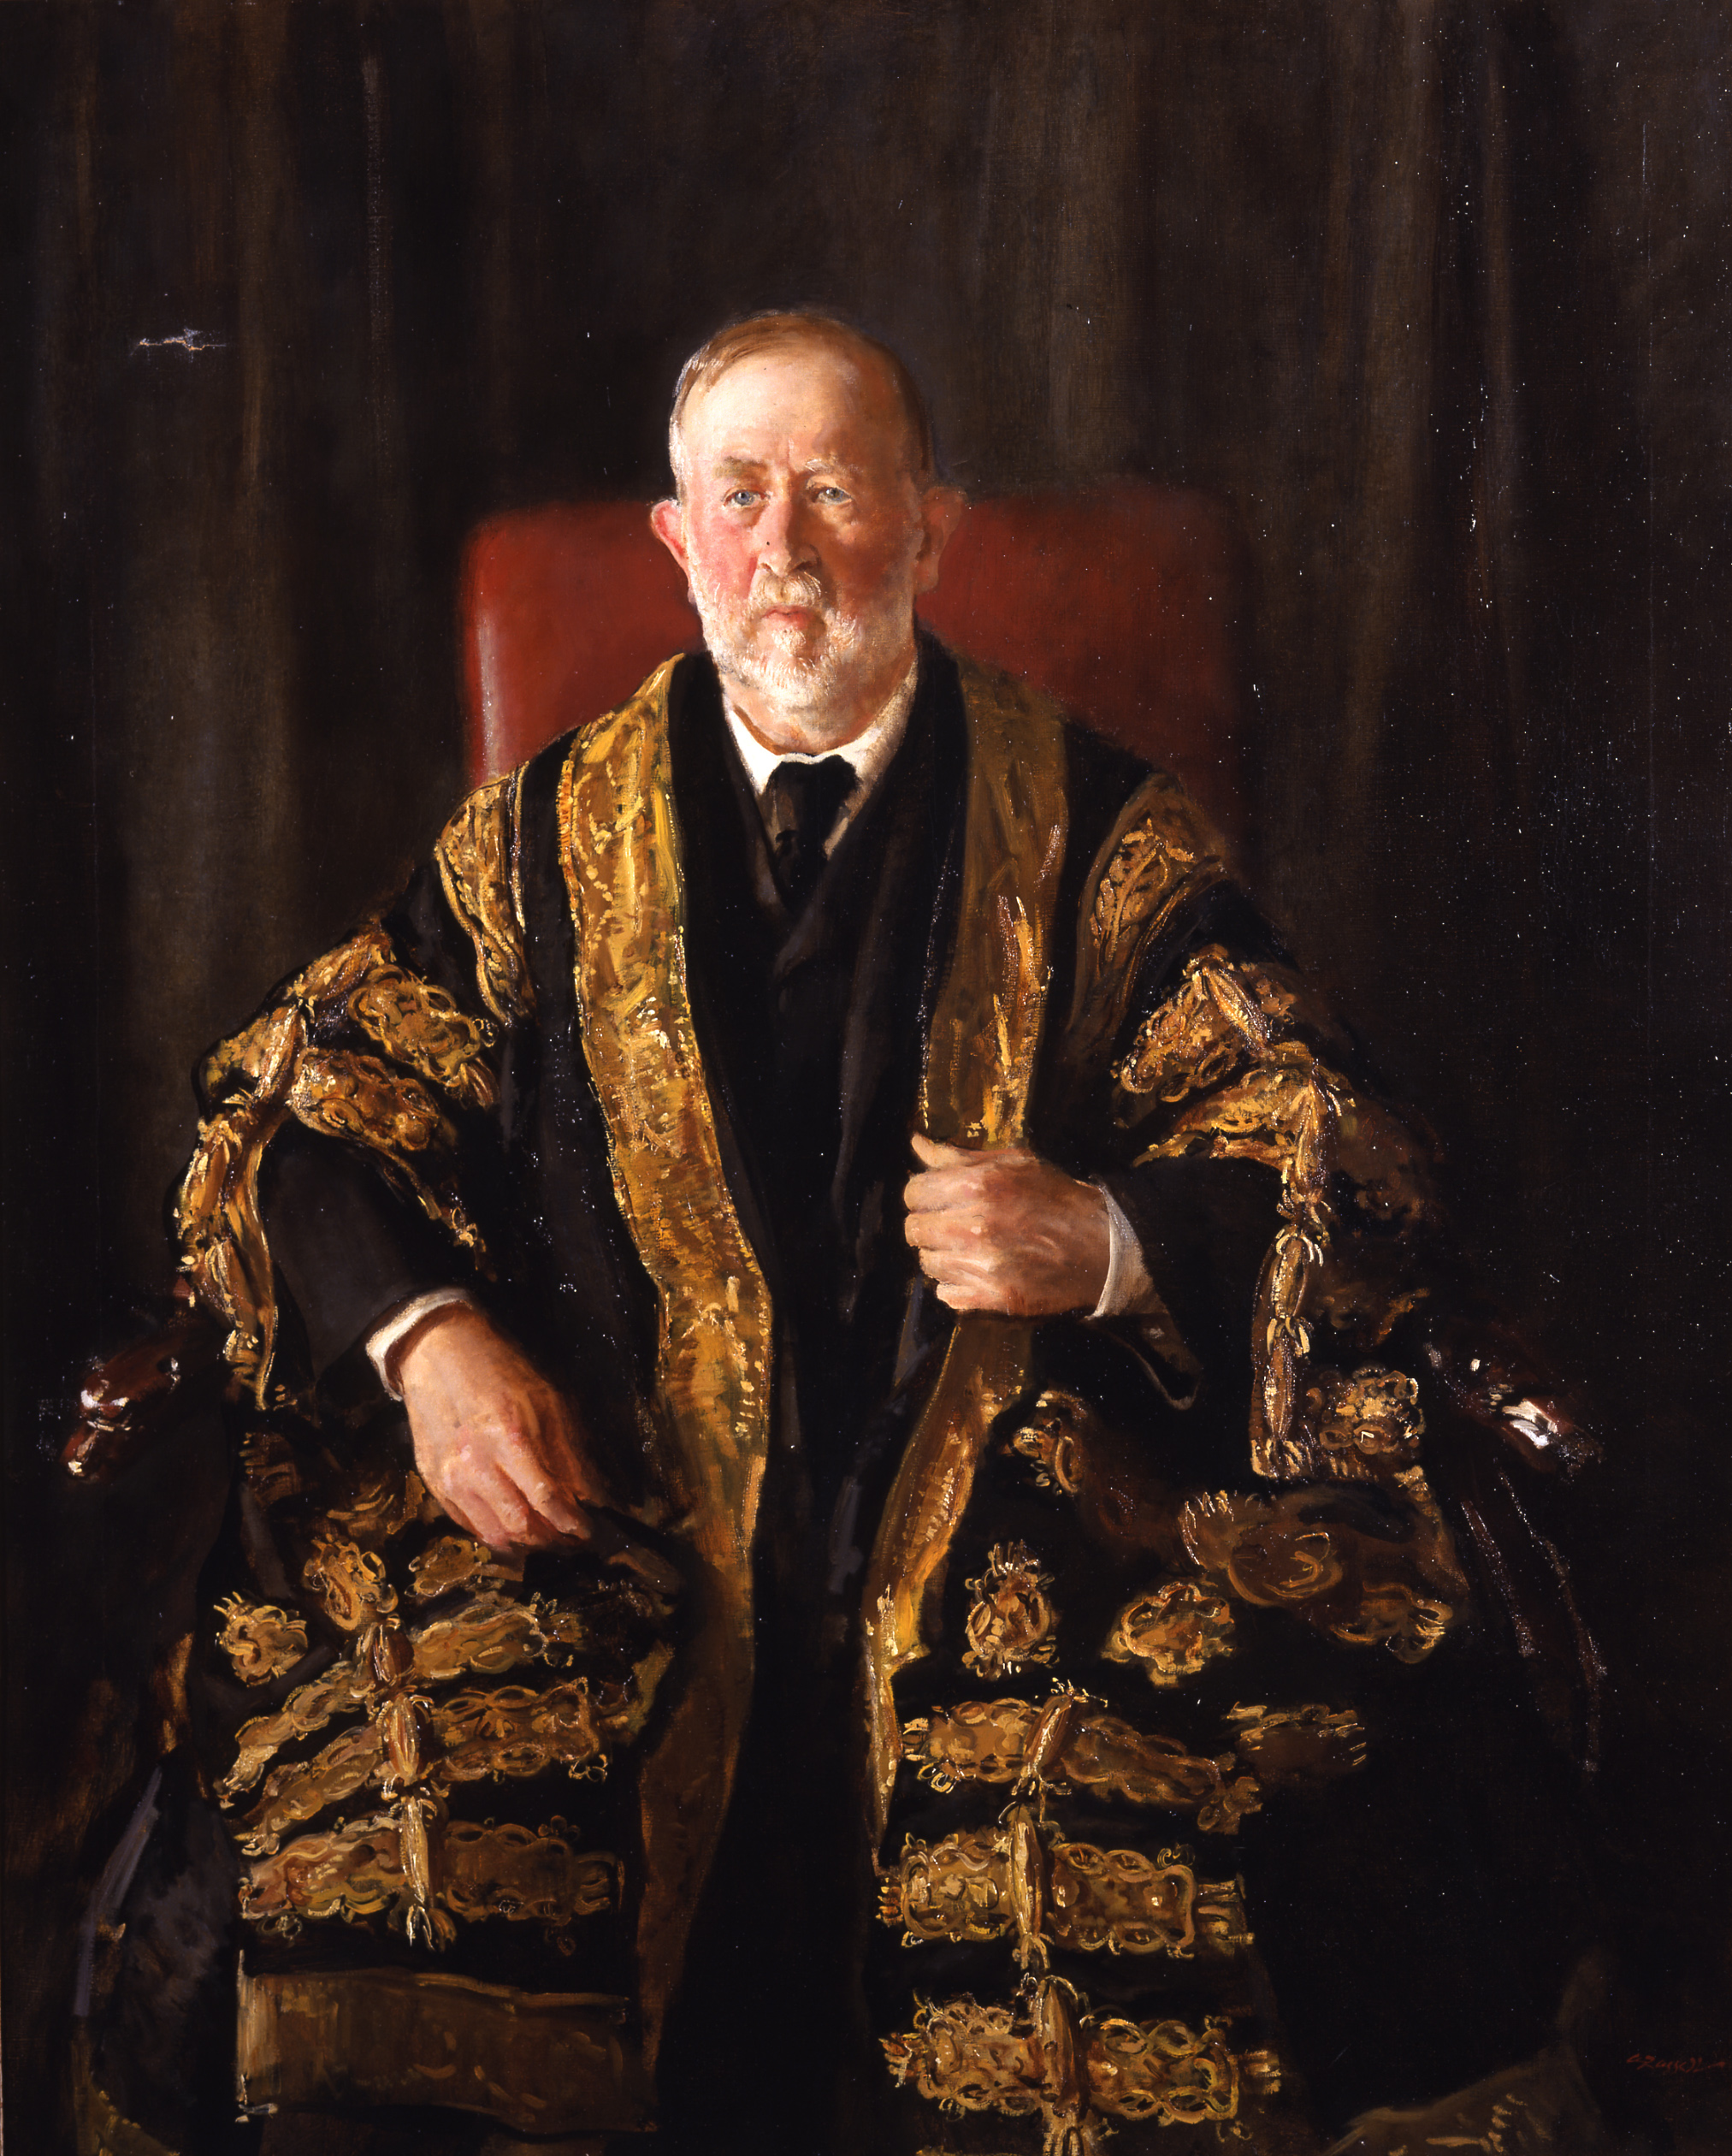 Seated portrait of Norman Moore wearing presidential robes.